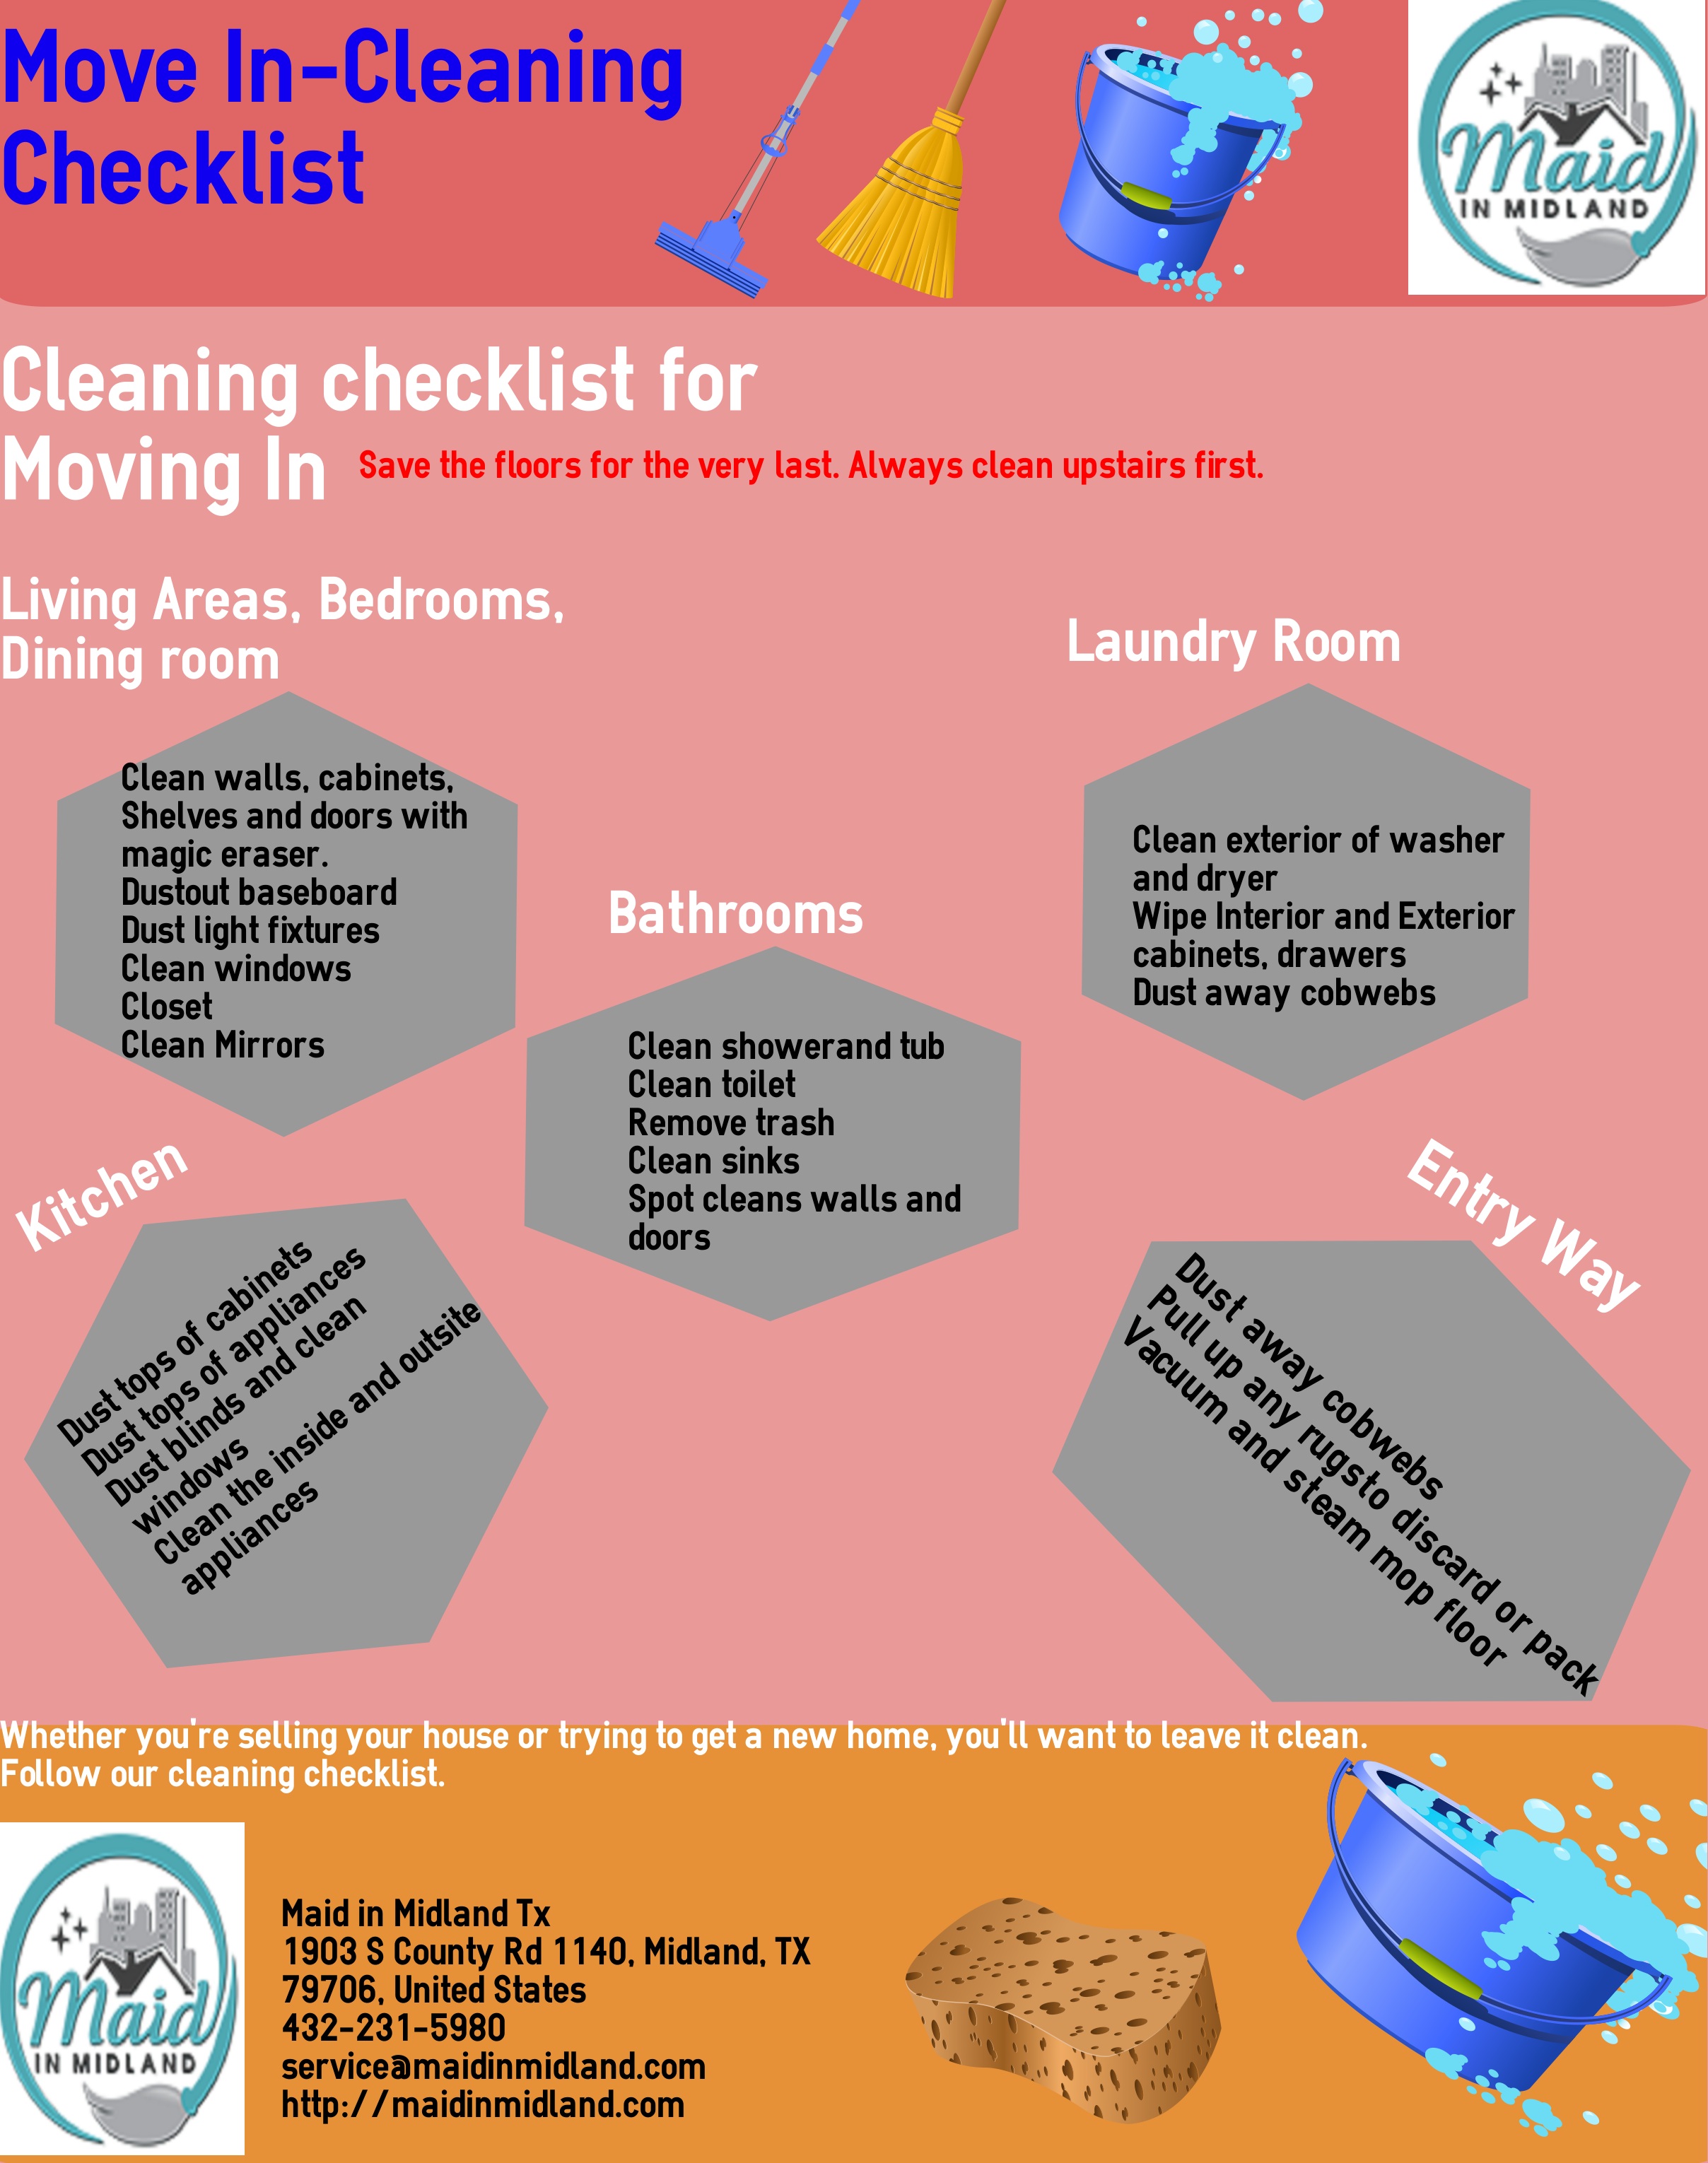 move-in-cleaning-checklist-by-maid-in-midland-tx-visual-ly